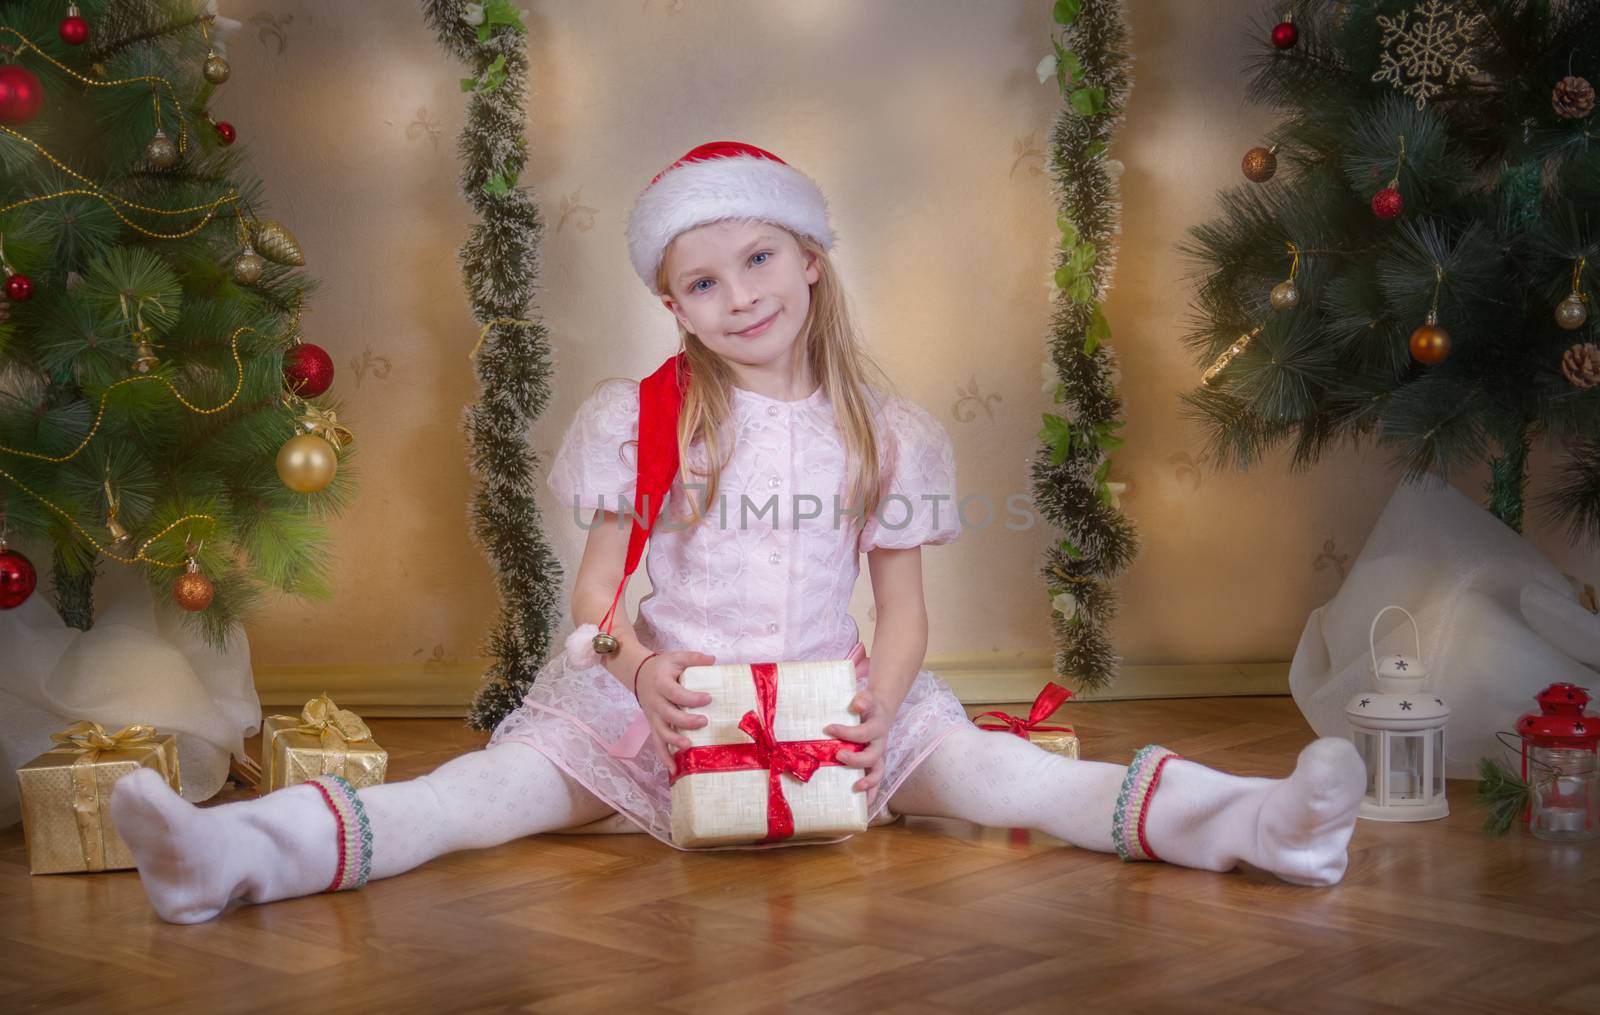 Cute girl in Santa hat sitting with gift among Christmas tree